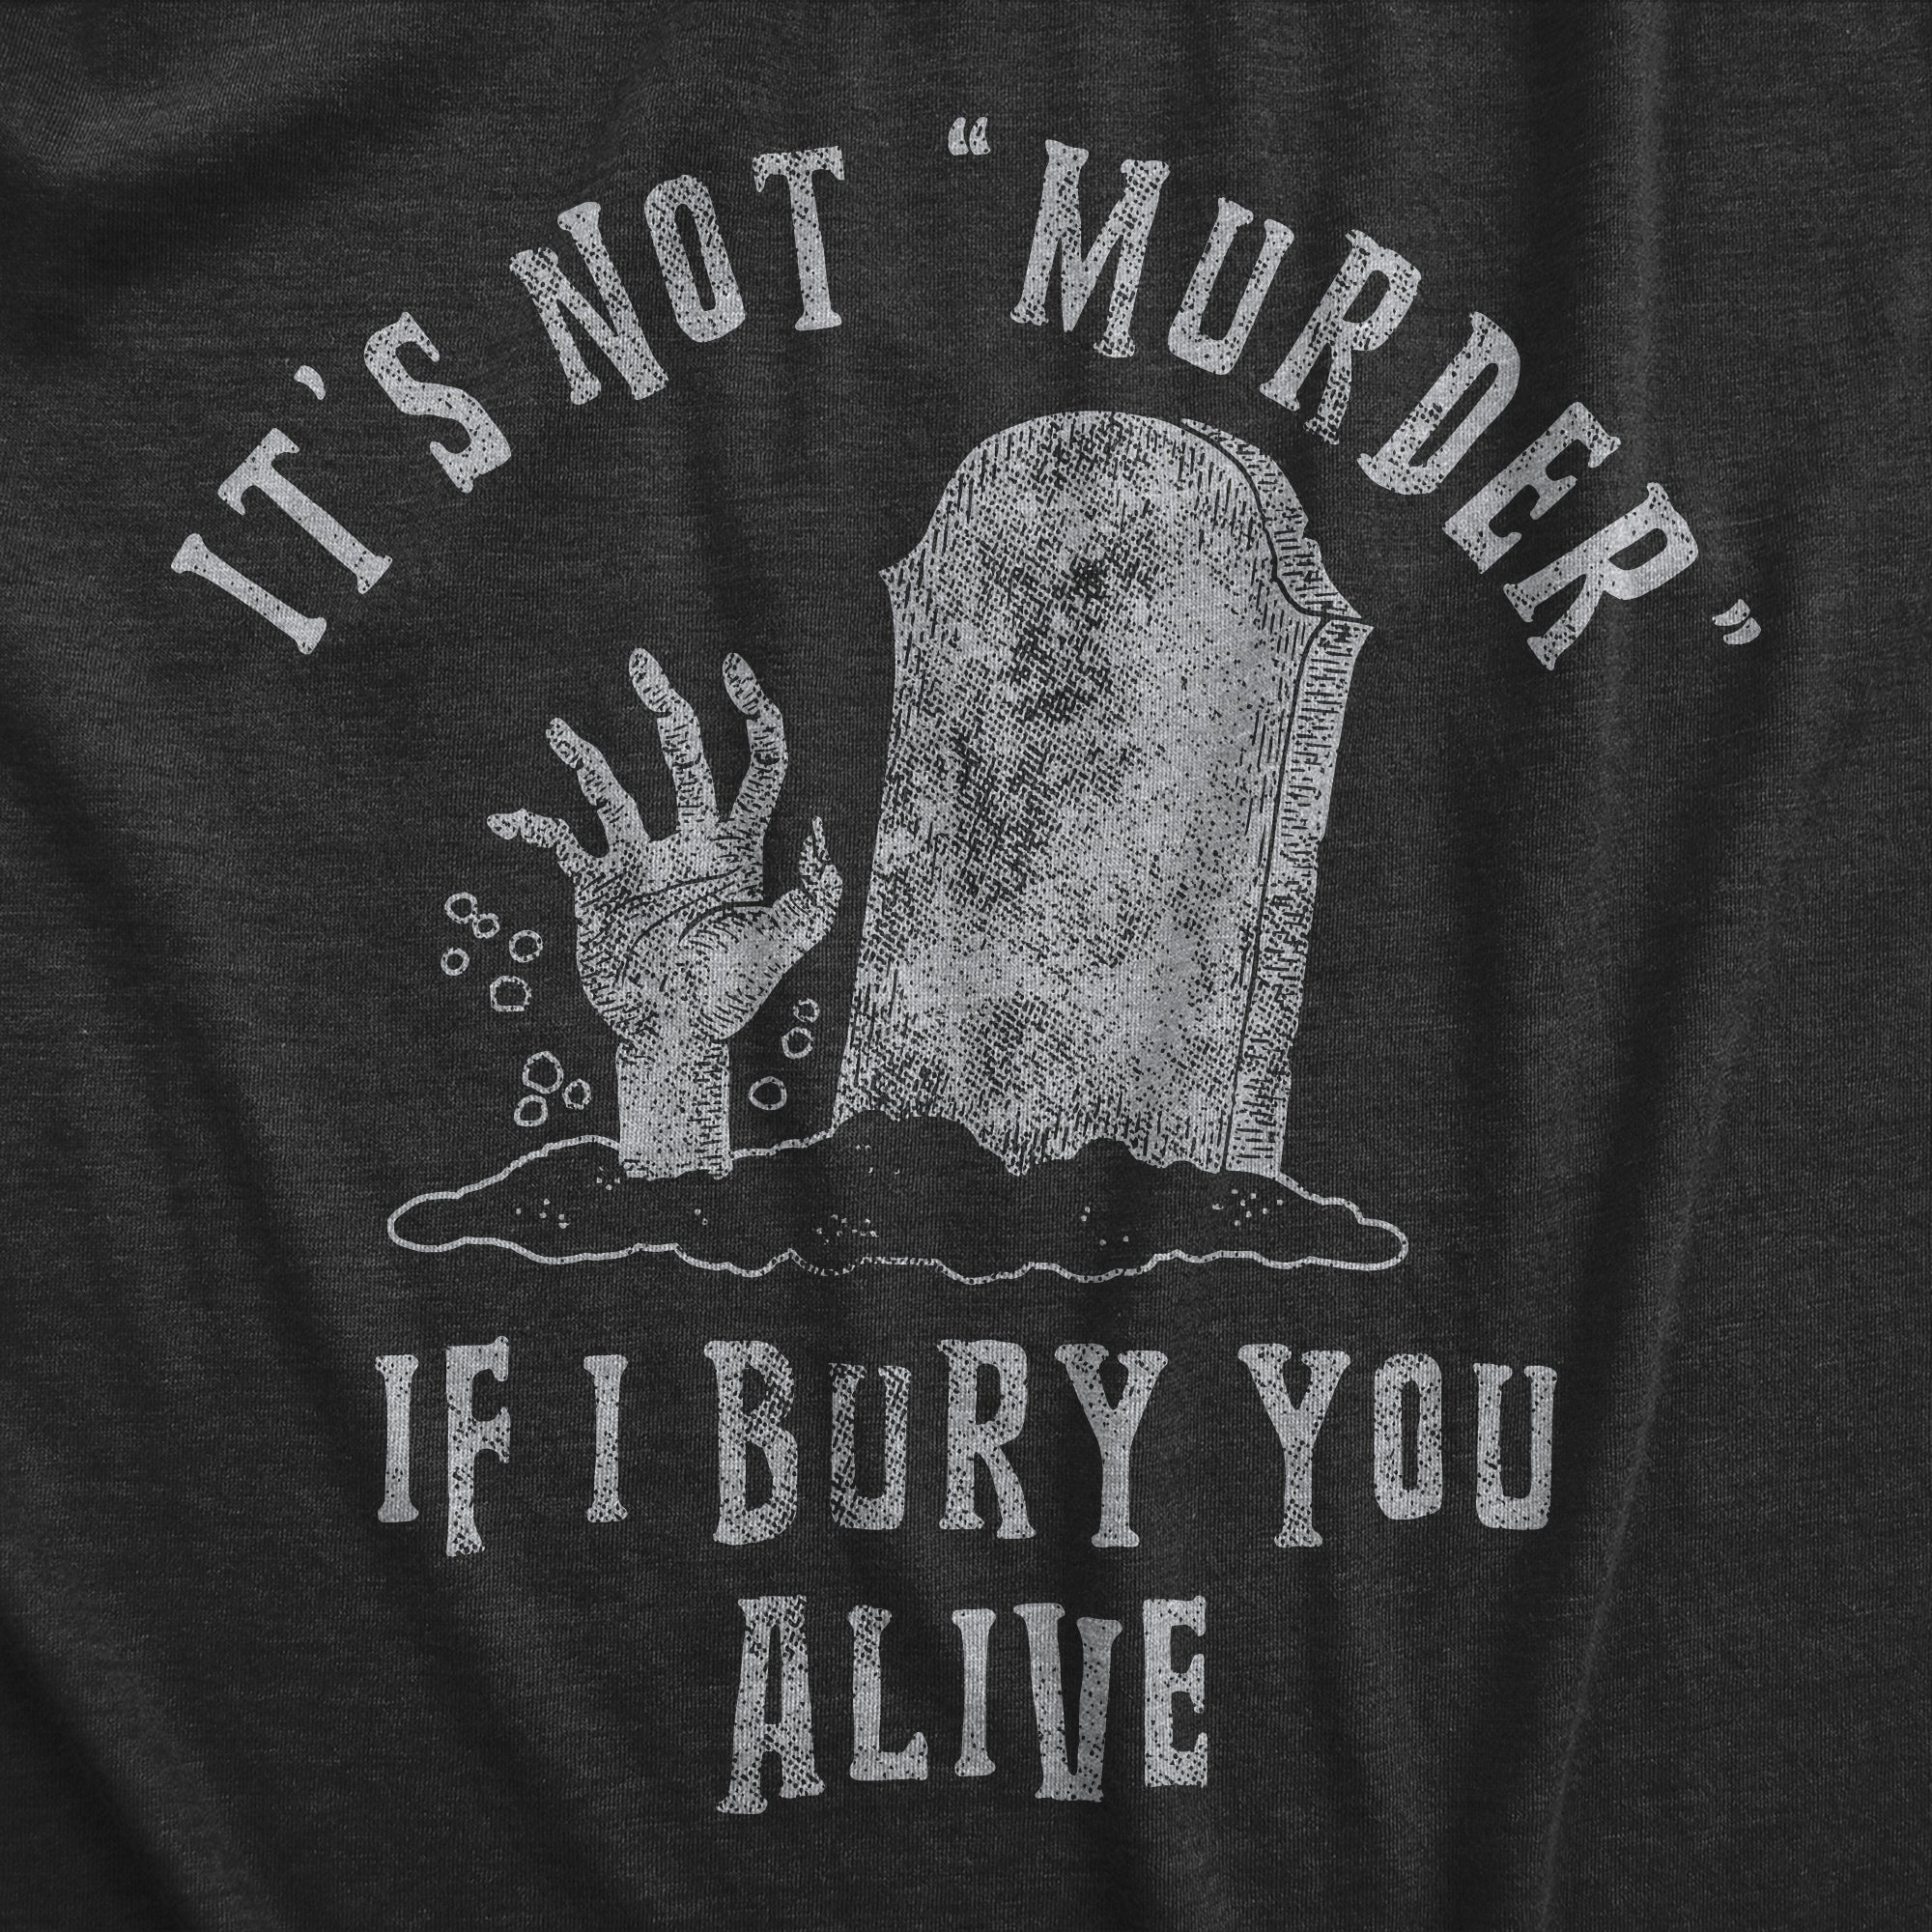 Funny Heather Black Its Not Murder If I Bury You Alive Mens T Shirt Nerdy Halloween Sarcastic Tee